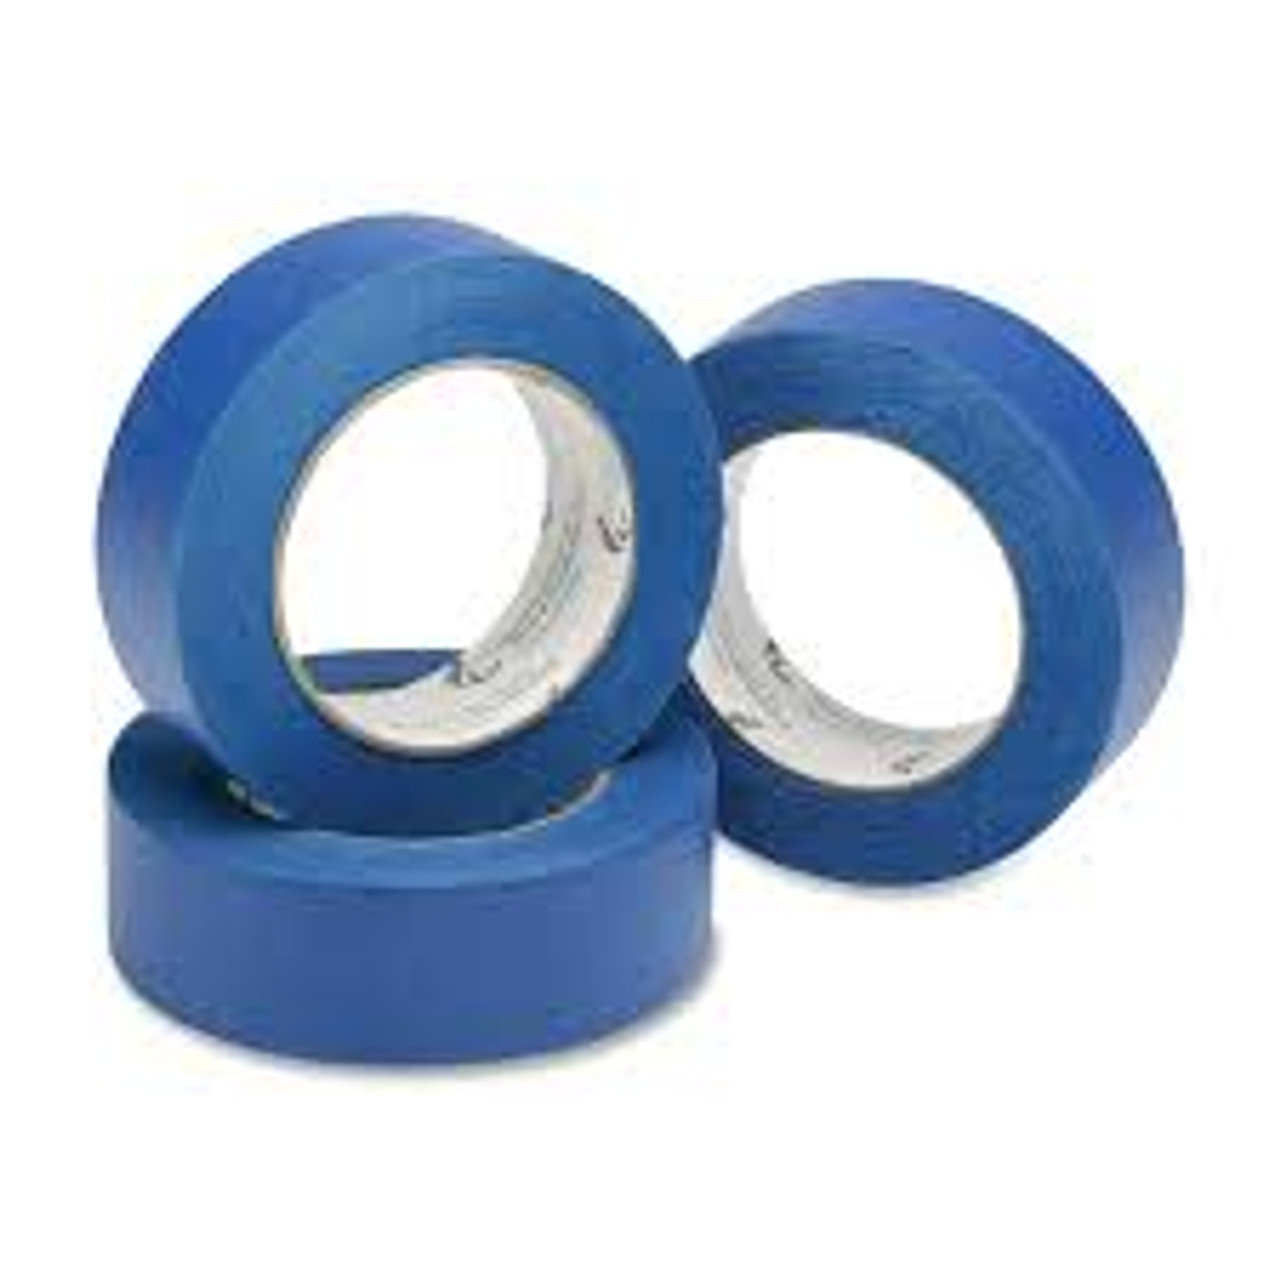 Easy Release Zip-Up Blue Masking Tape, 2x60 Yds, 180' Roll, 1 Roll